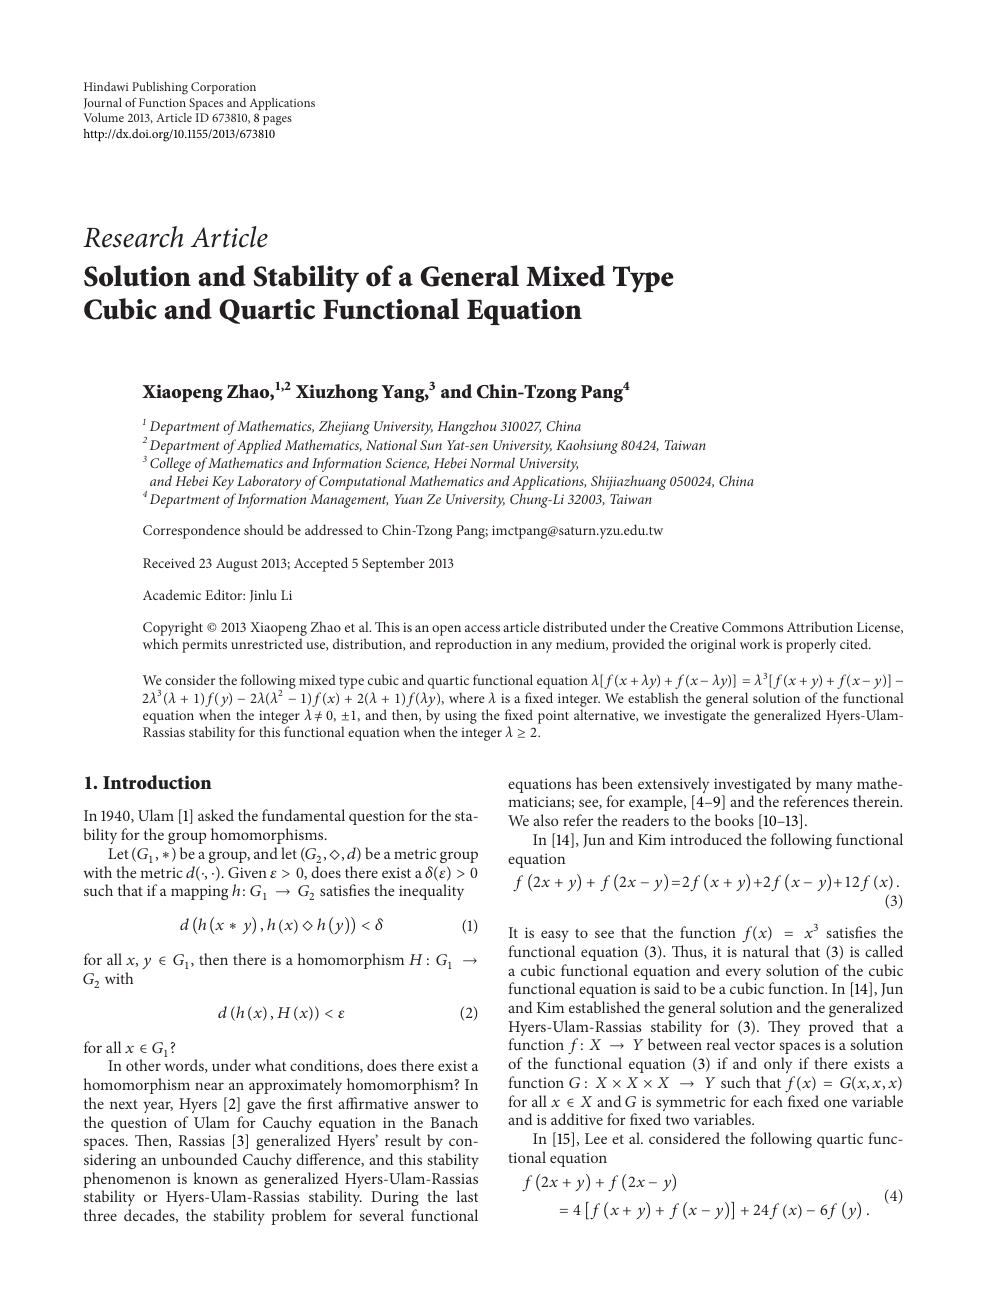 Solution And Stability Of A General Mixed Type Cubic And Quartic Functional Equation Topic Of Research Paper In Mathematics Download Scholarly Article Pdf And Read For Free On Cyberleninka Open Science